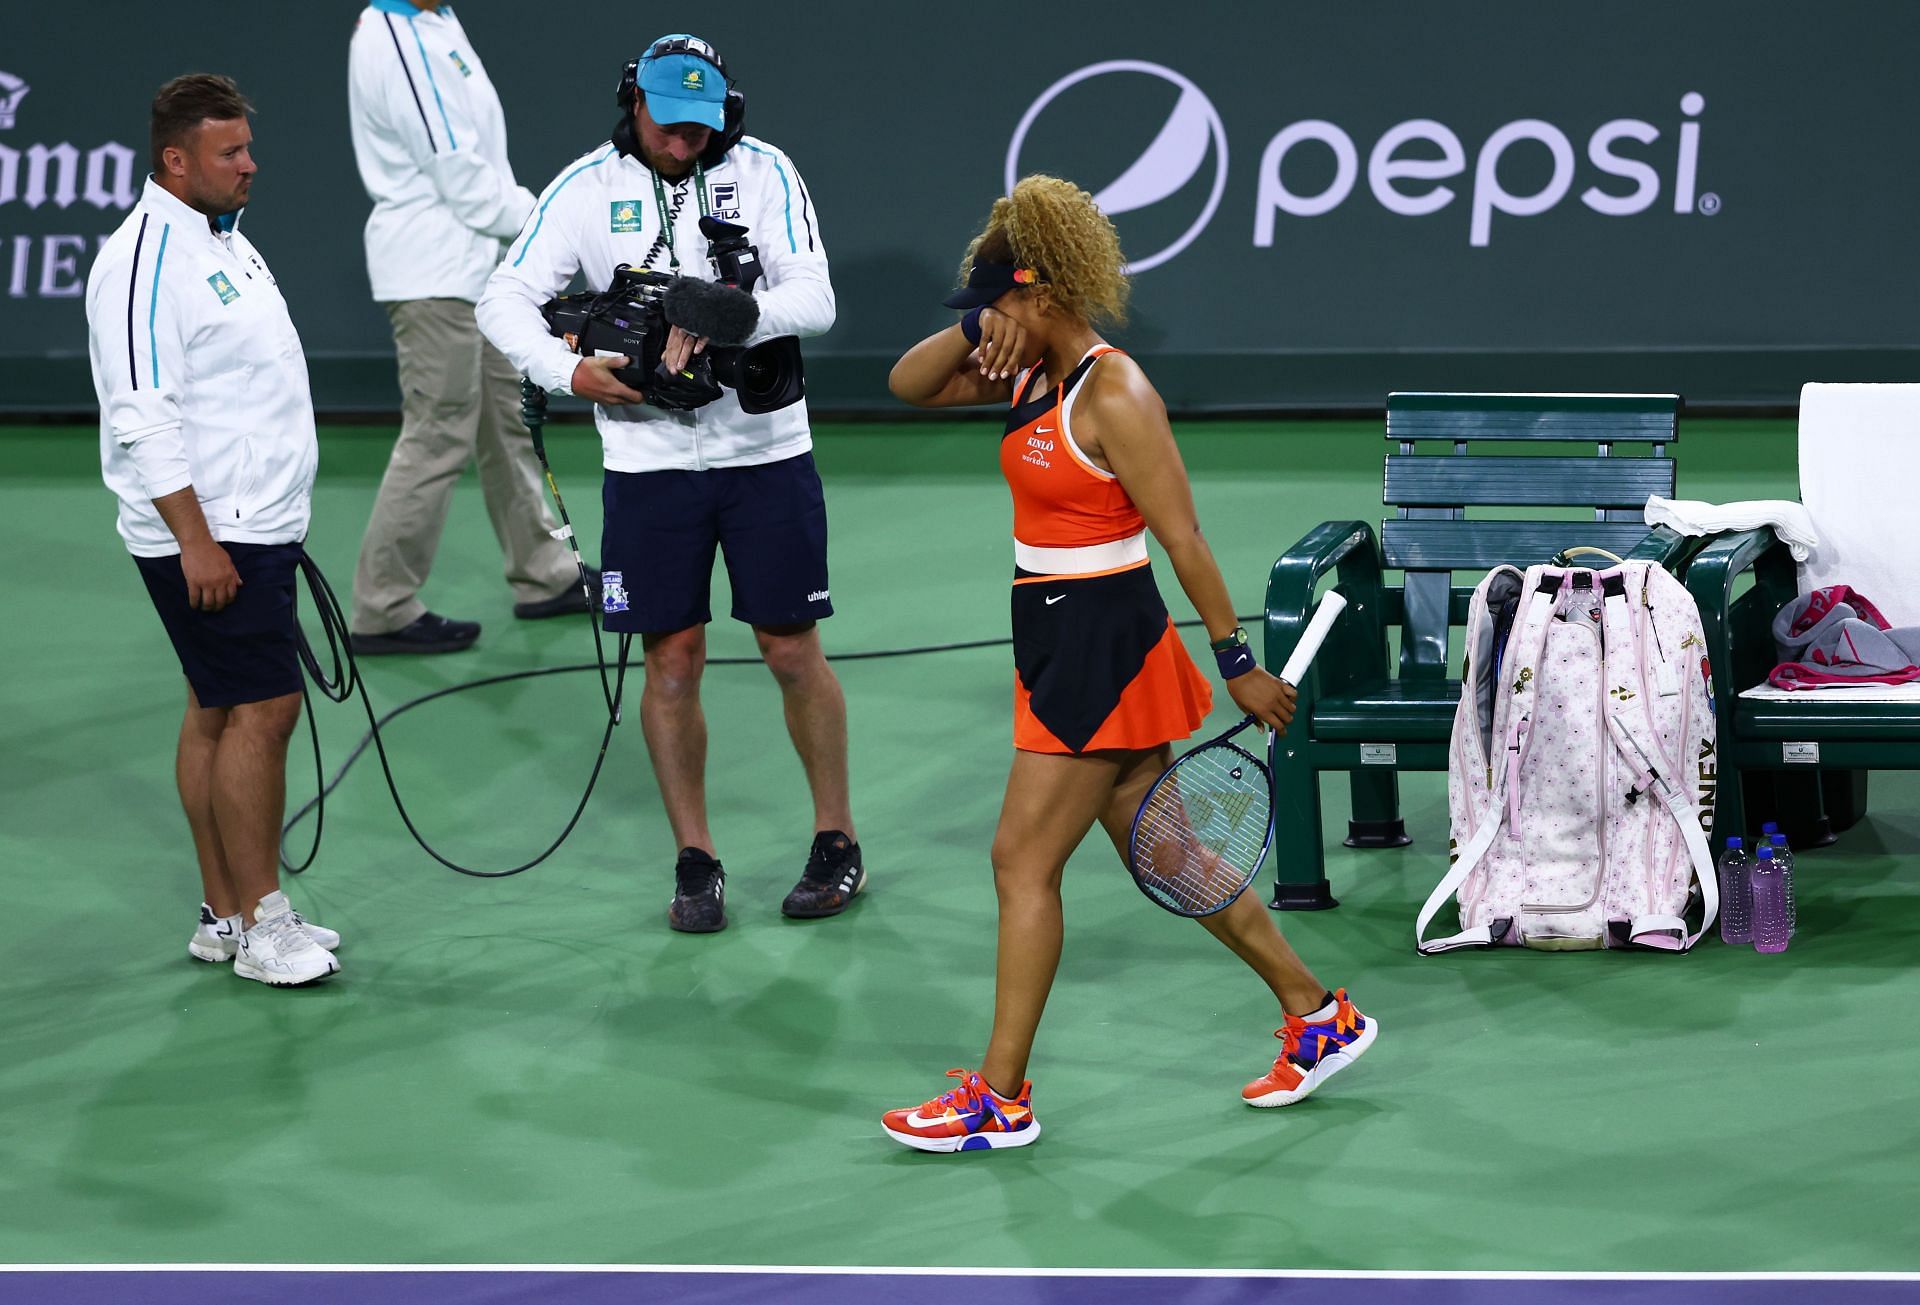 Naomi Osaka was upset with a comment made by a spectator